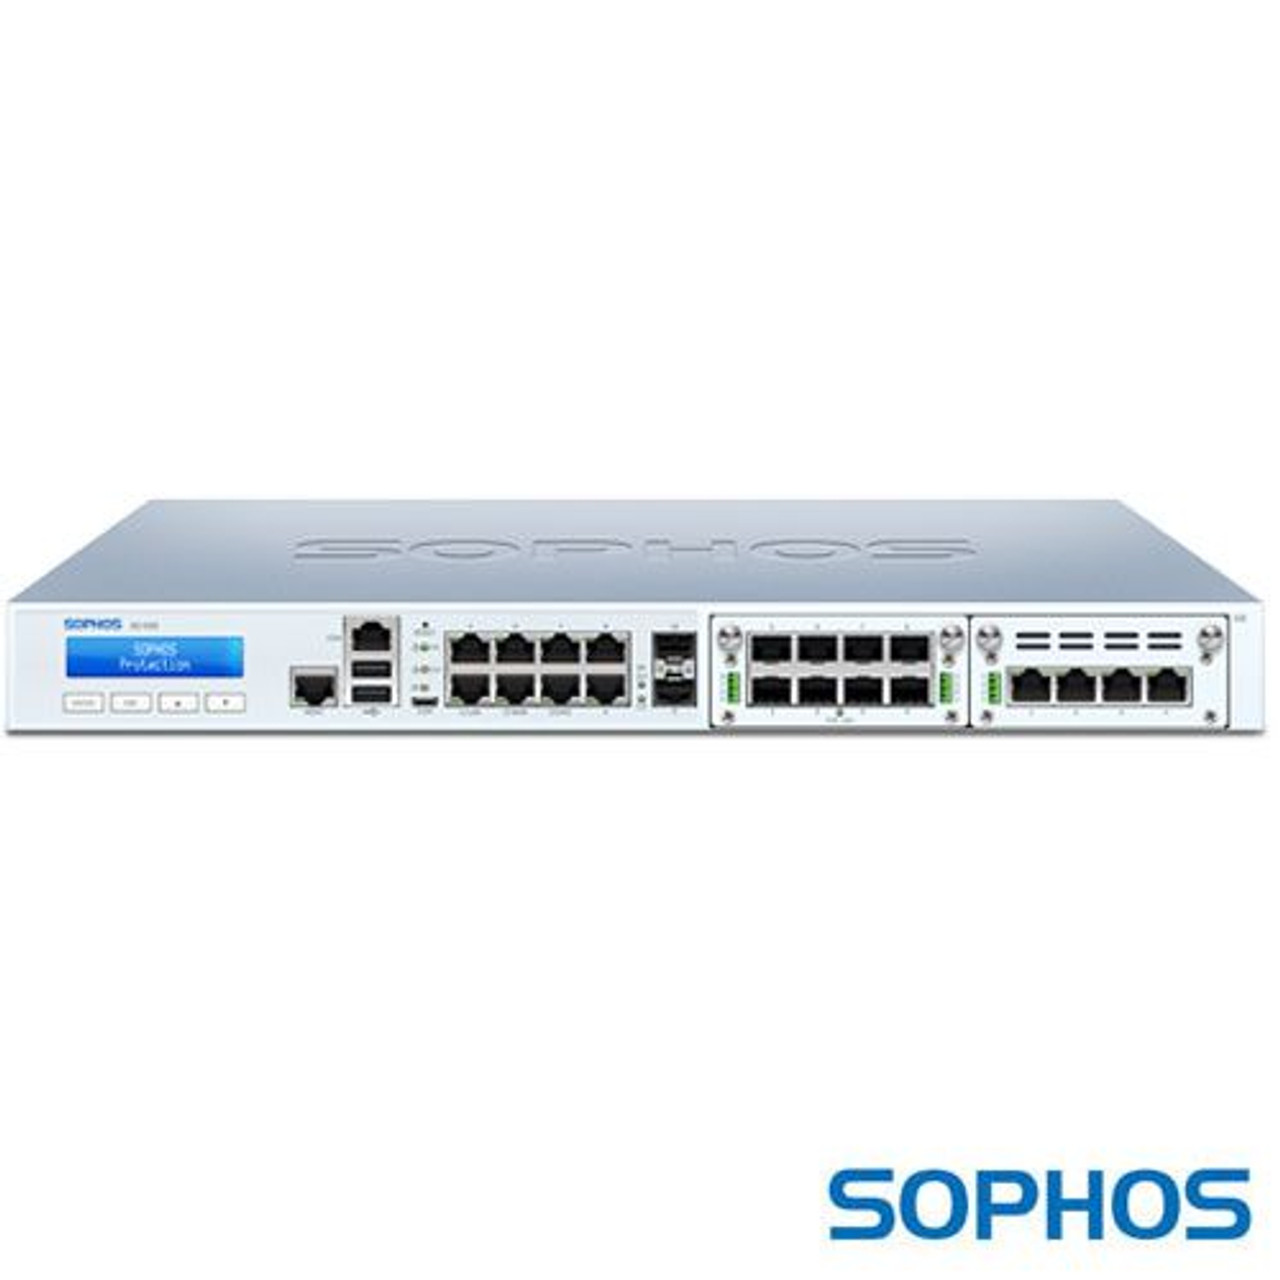 Sophos XGS 4300 Security Appliance - US power cord